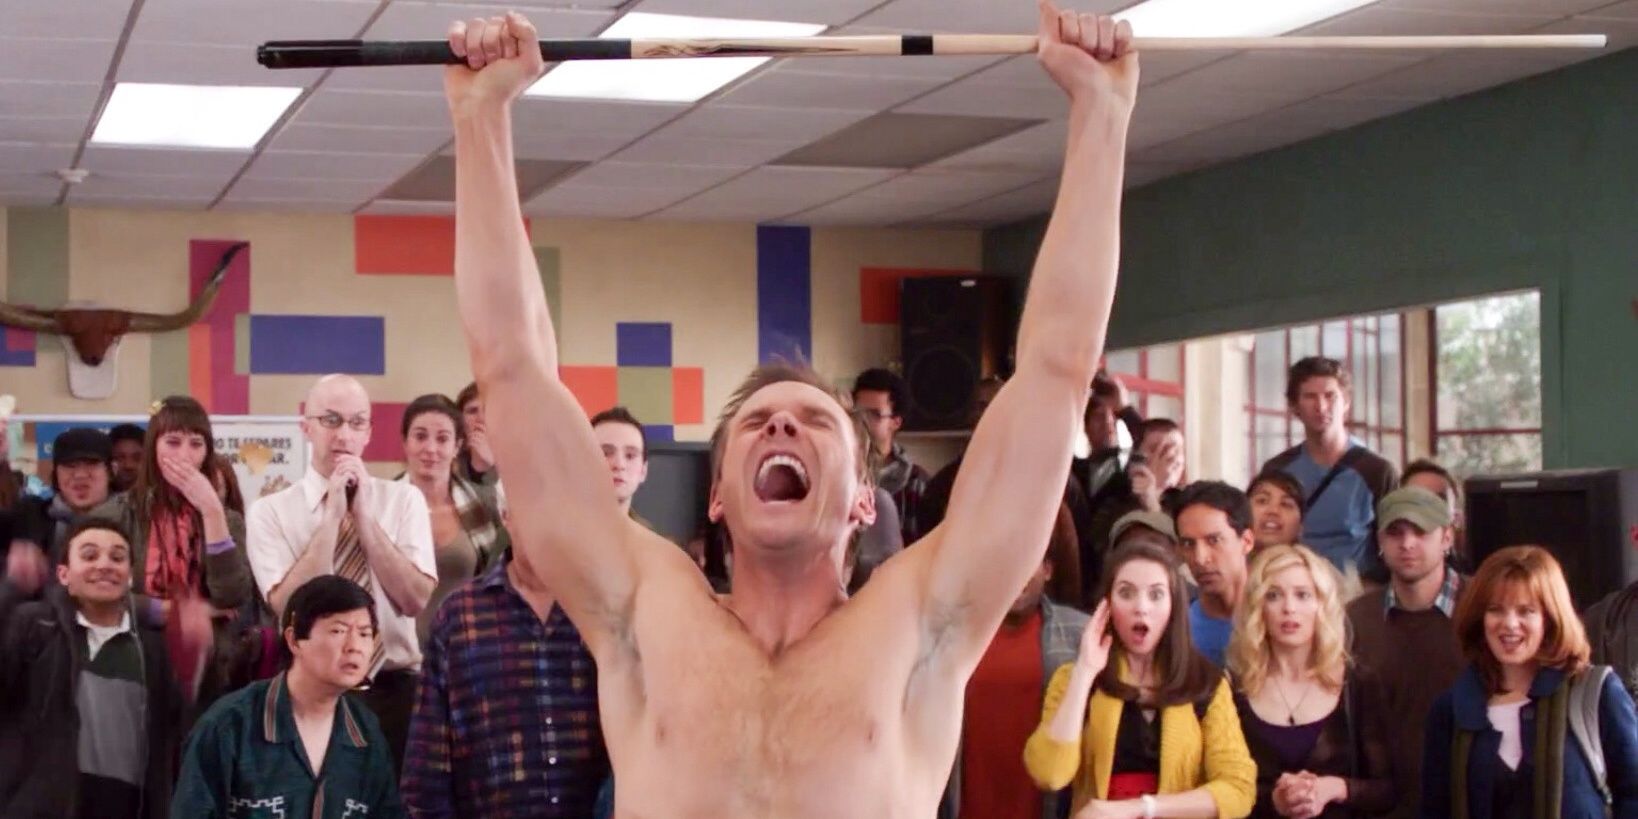 Jeff Winger shirtless raising a pool cue and cheering in celebration in front of a crowd in community